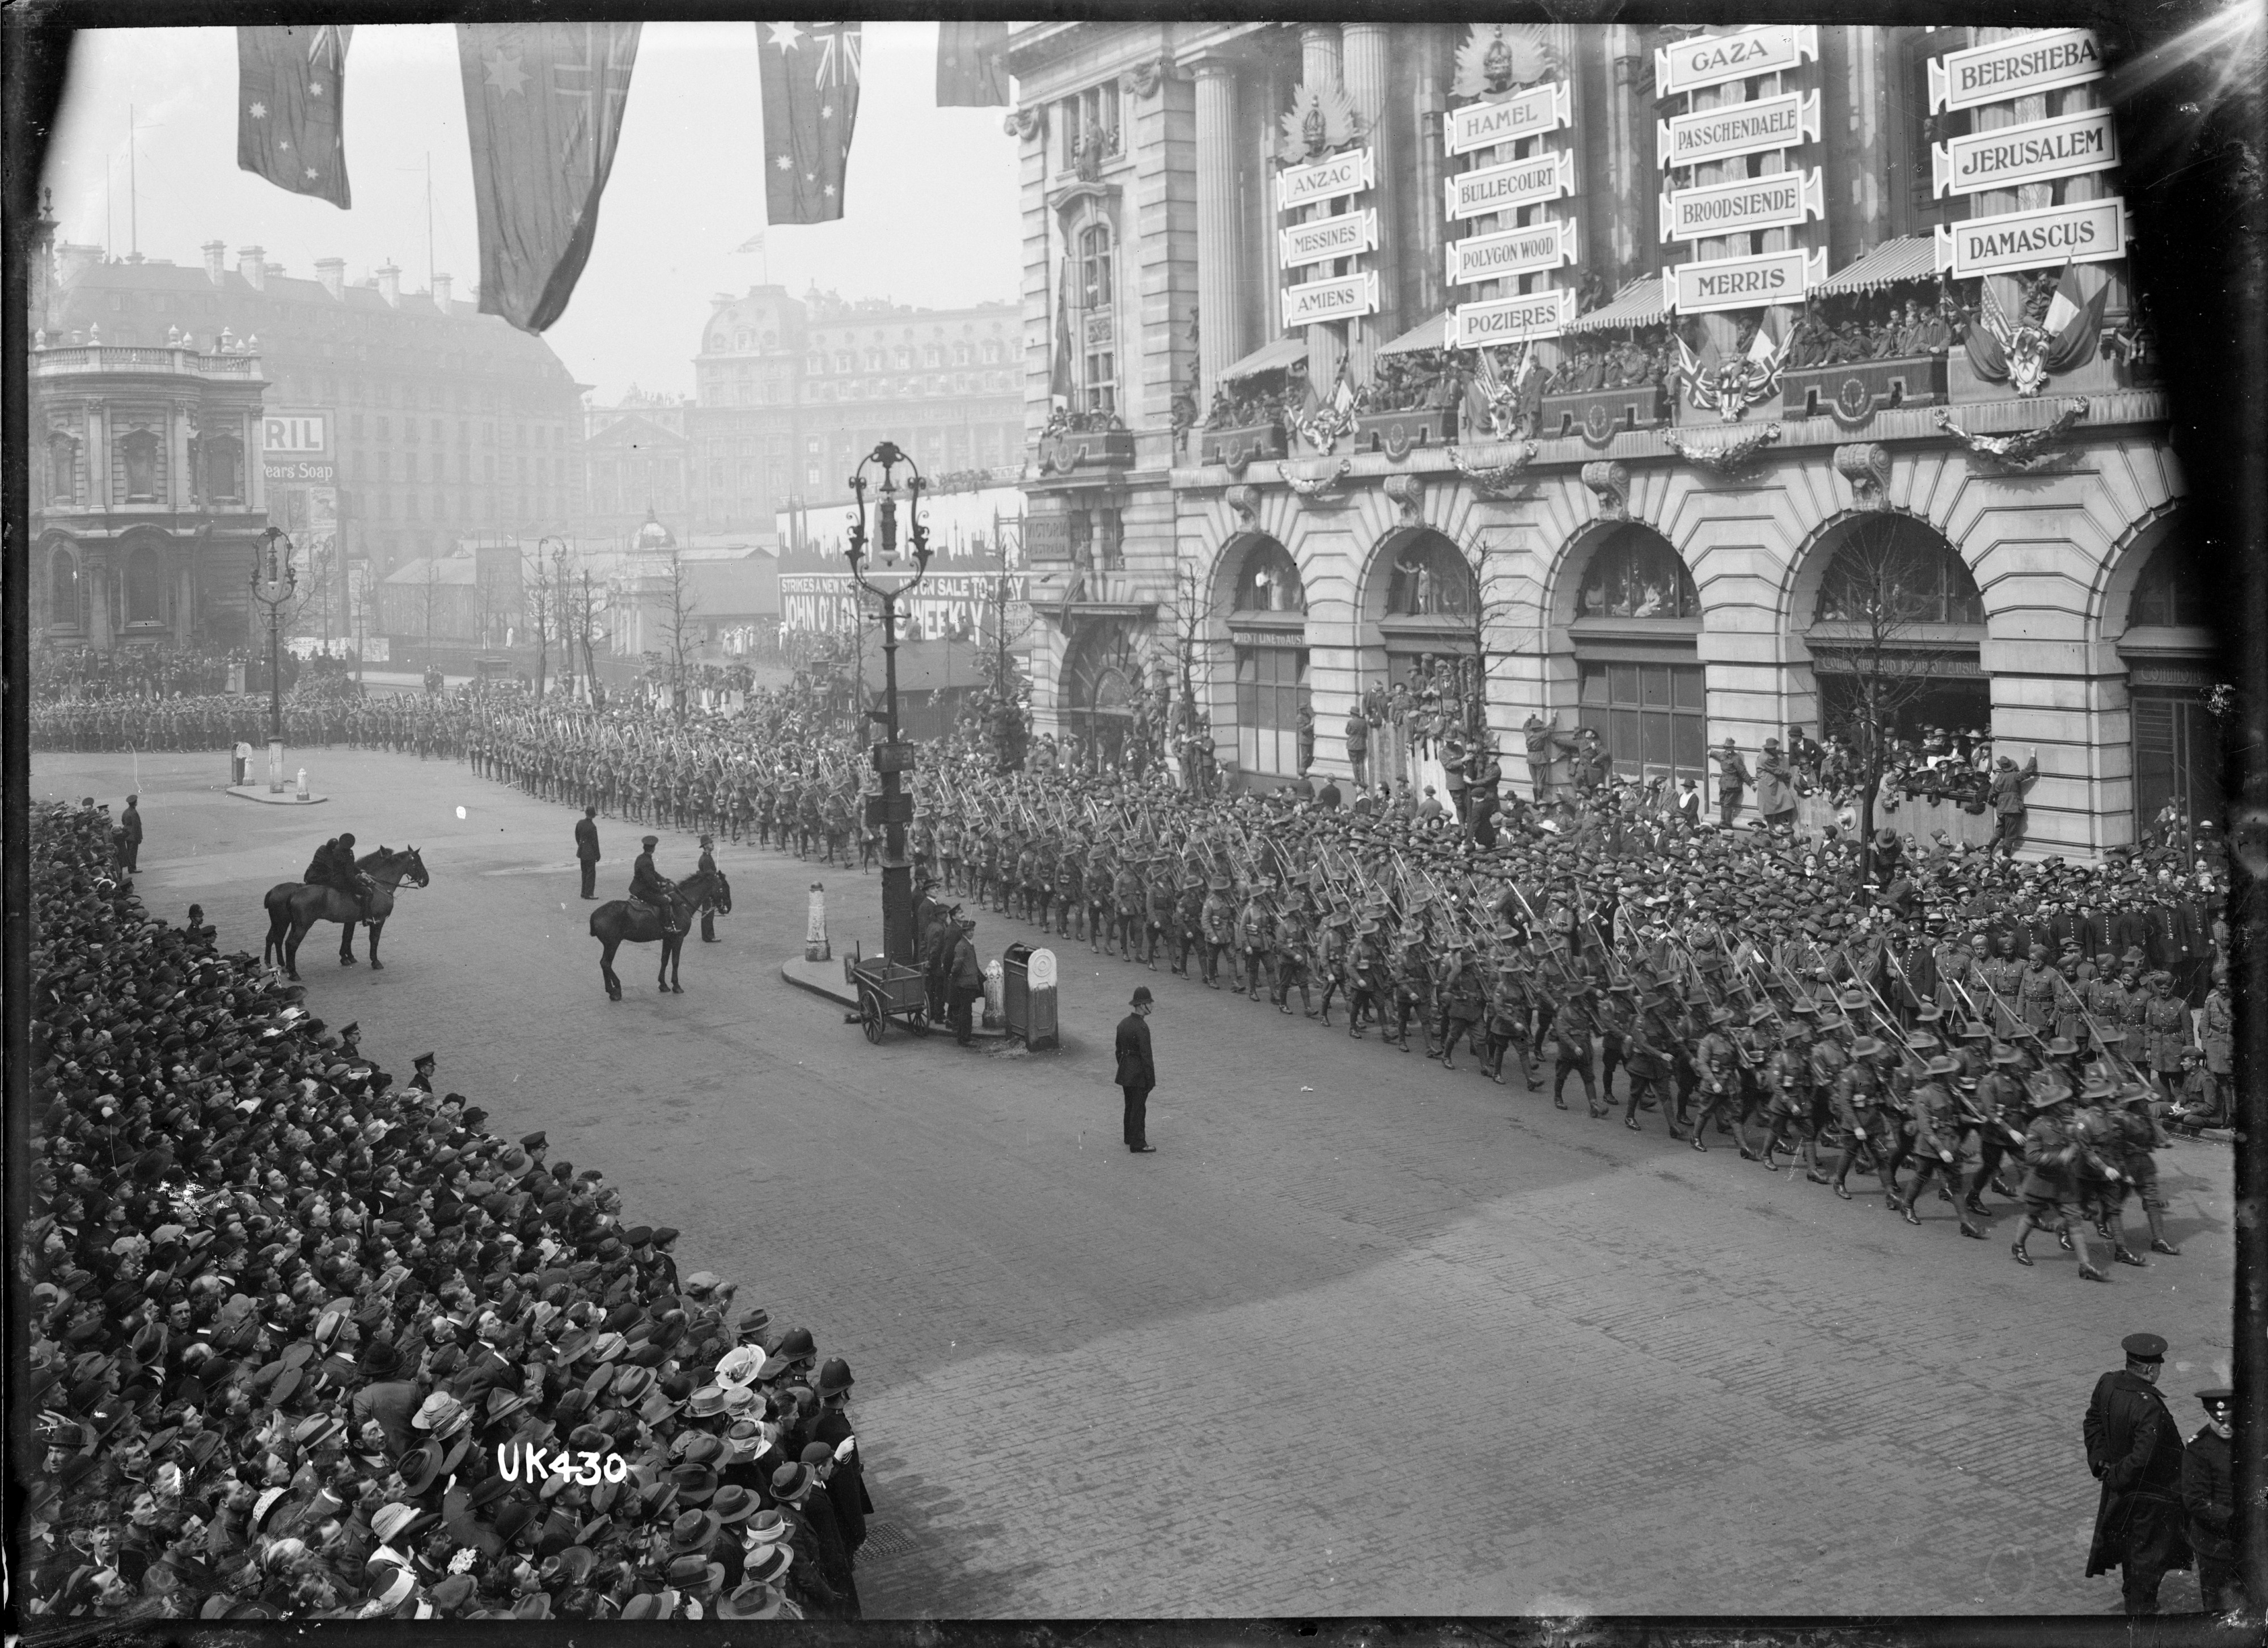 Australian troops in a march past, London, after World War I, 1919 (3056447621)